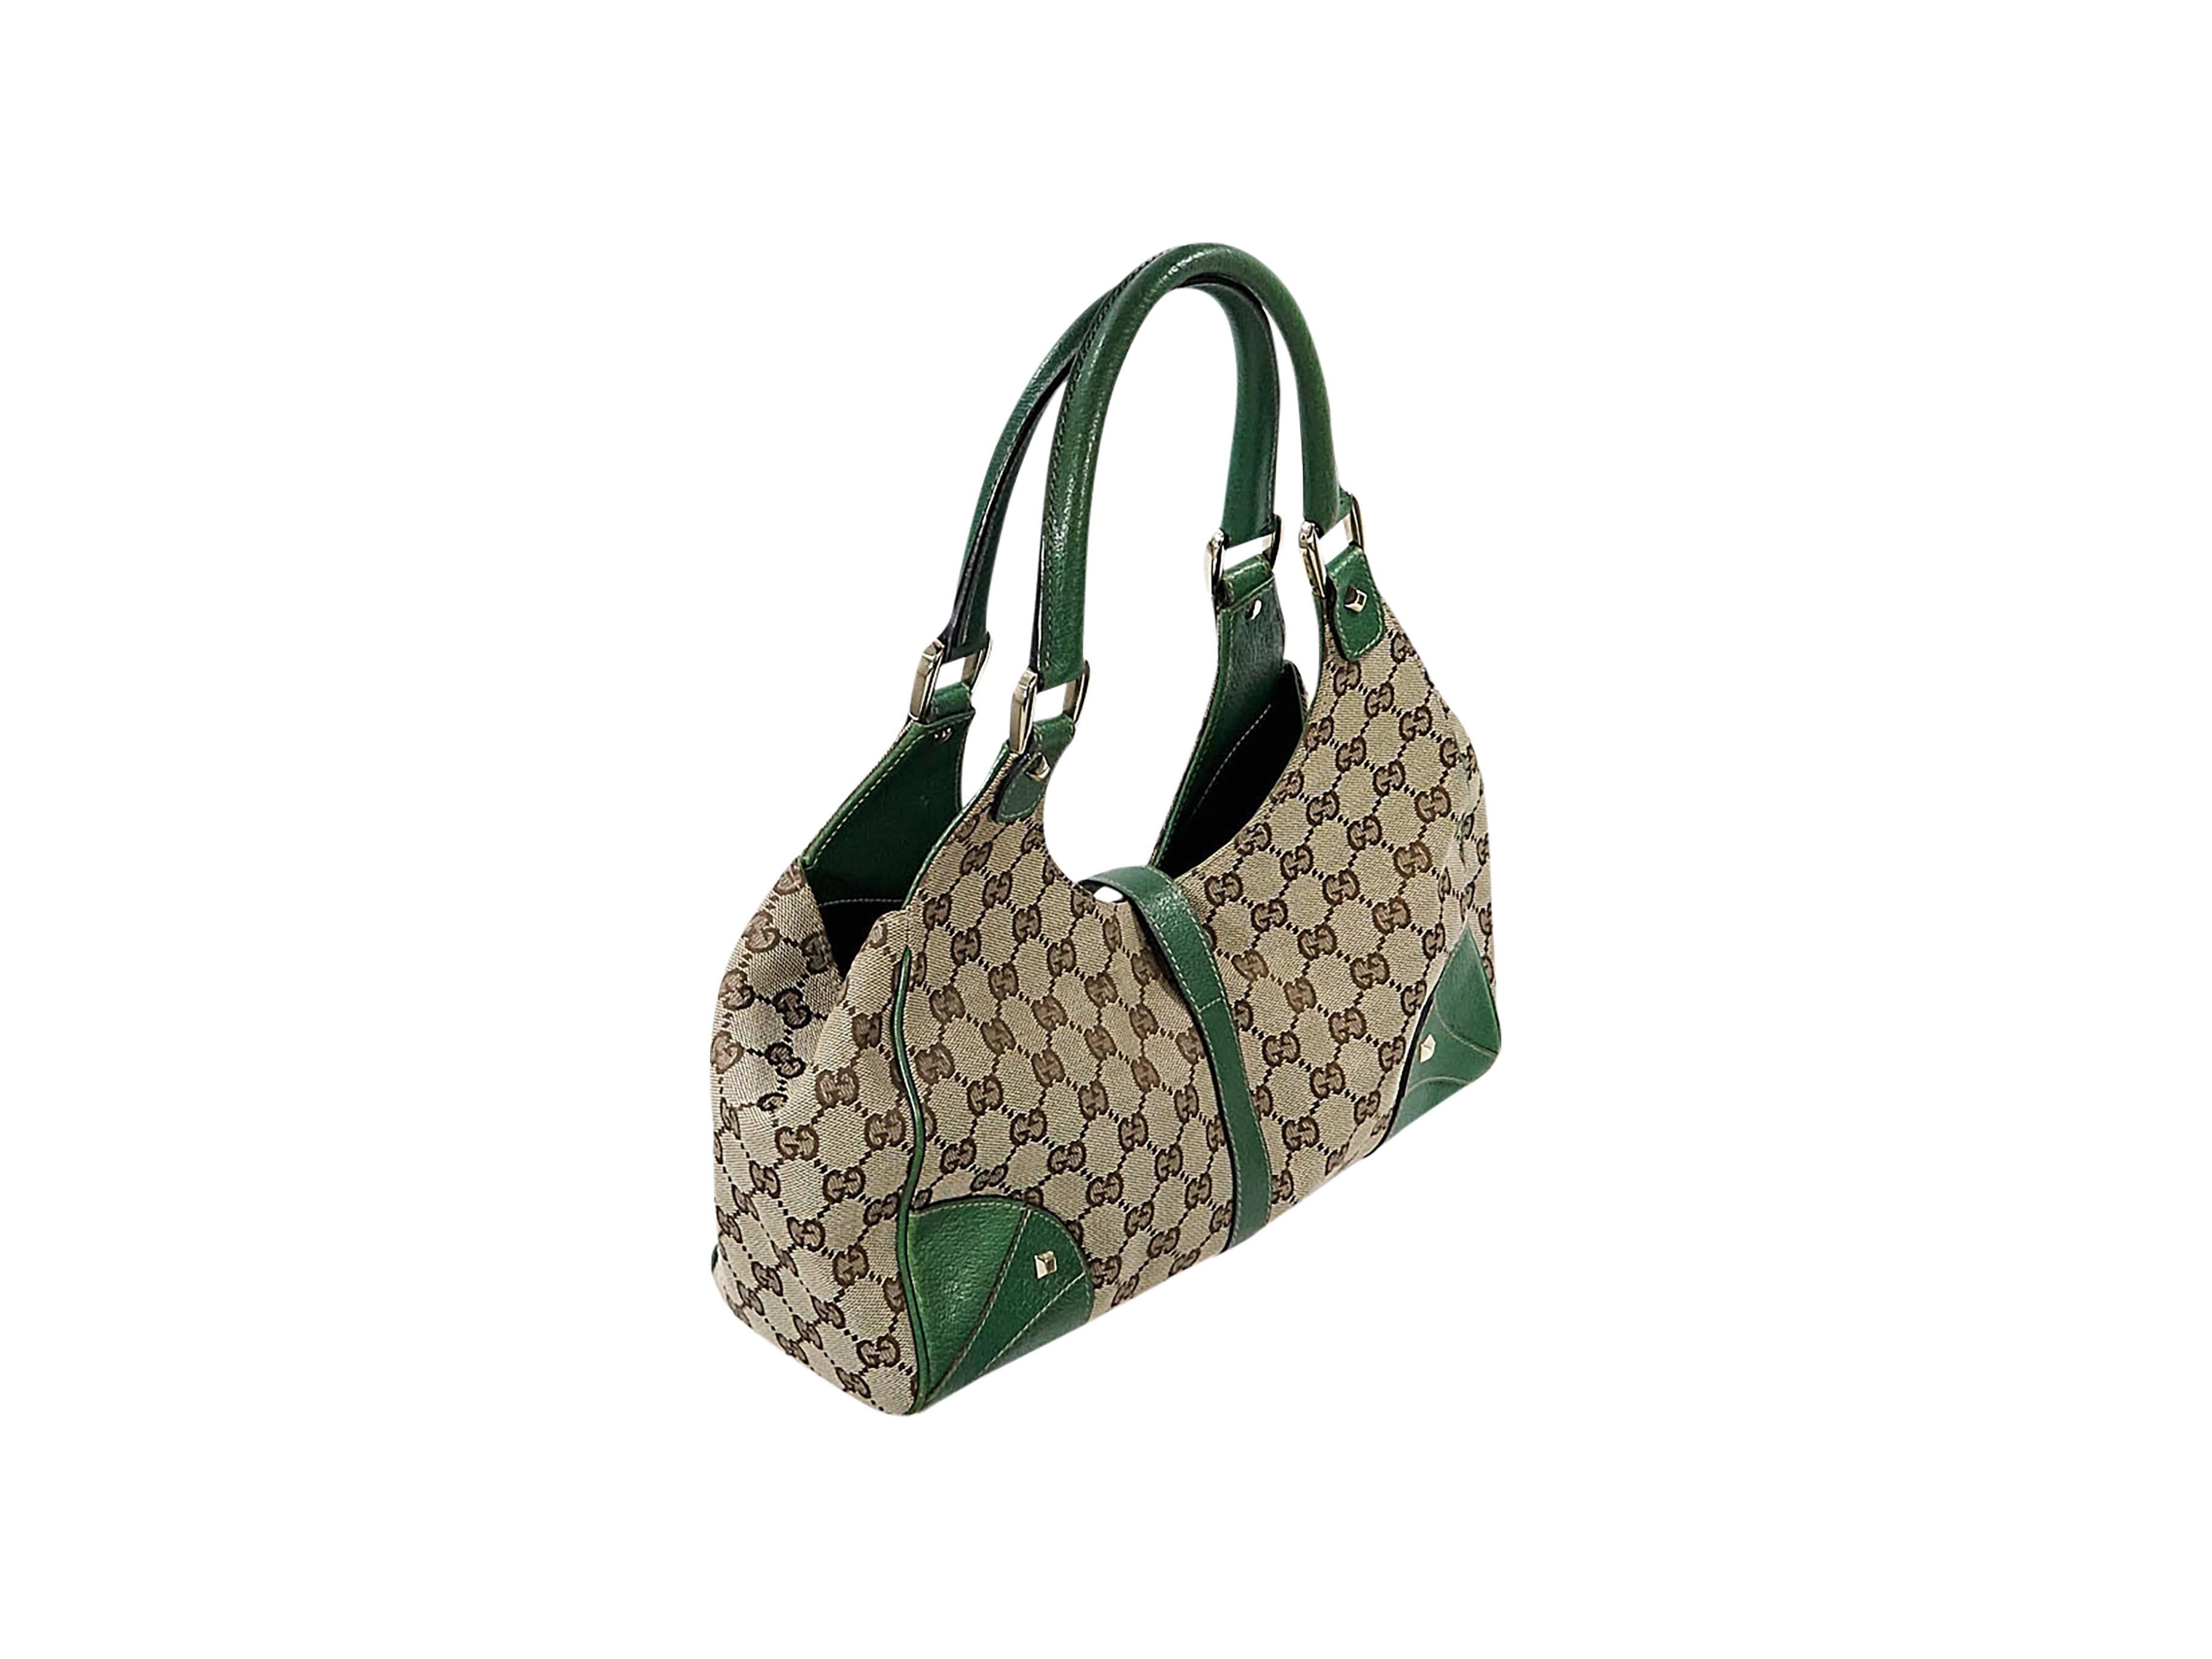 Product details: Tan GG logo Jackie shoulder bag by Gucci. Accented with green leather. Dual shoulder straps. Push-lock clasp closure. Lined interior with inner zip pocket. Protective metal feet. Goldtone hardware. 14